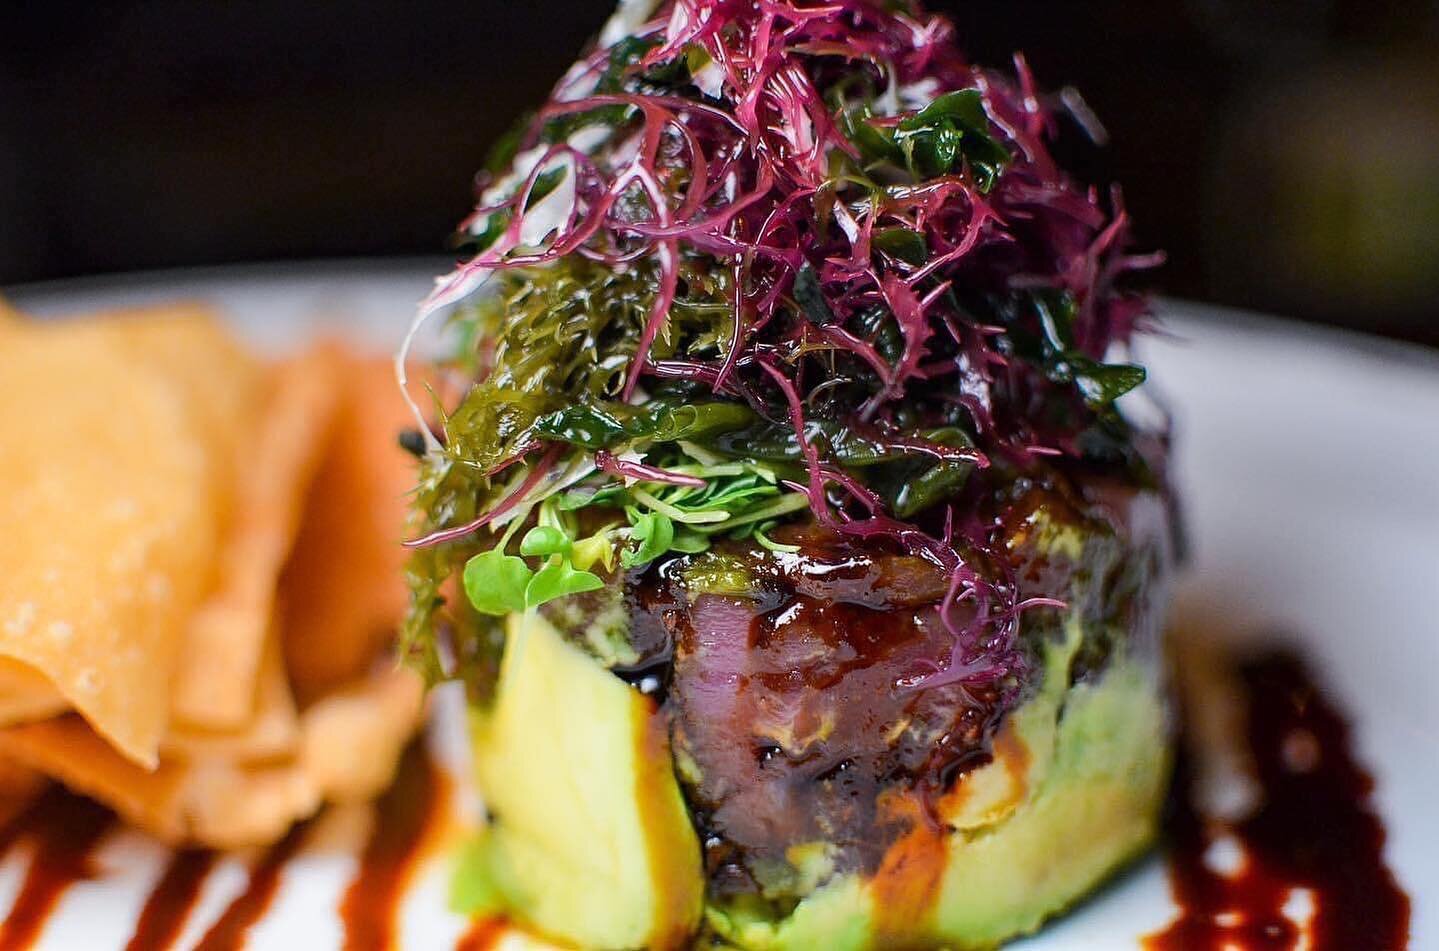 Ahi Tartare is back on our dinner menu! Now serving the Ahi Appetizer with Avocado, Pickled Seaweed, Watercress Green Ponzu, and Soy Caramel $24
.
.
.
.
📷: @ackergraphics #arroyochophouse #pasadena #pasadenacharm #pasadenaca #visitpasadena #pasadena